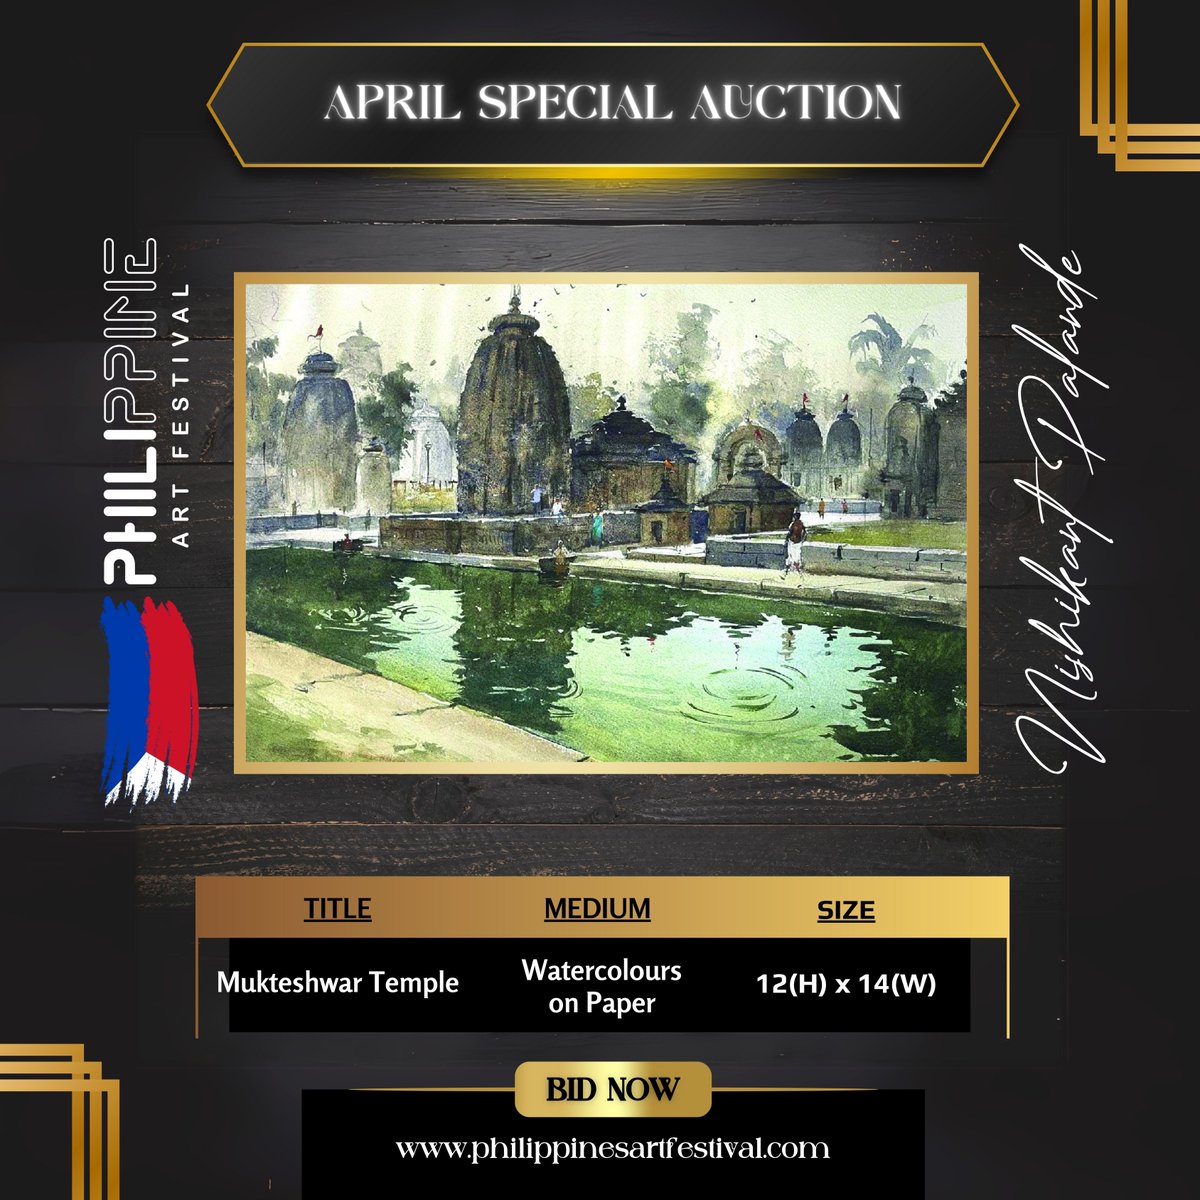 Join us for a celebration of creativity and bid on breathtaking artworks that will make this month of April extra special. Visit our website to bid now!

#PhilippineArtFestival #Artfestival #artevent #artfest #artists #Filipinoart #Filipinoartists #Filipino #ArtinPhilippines